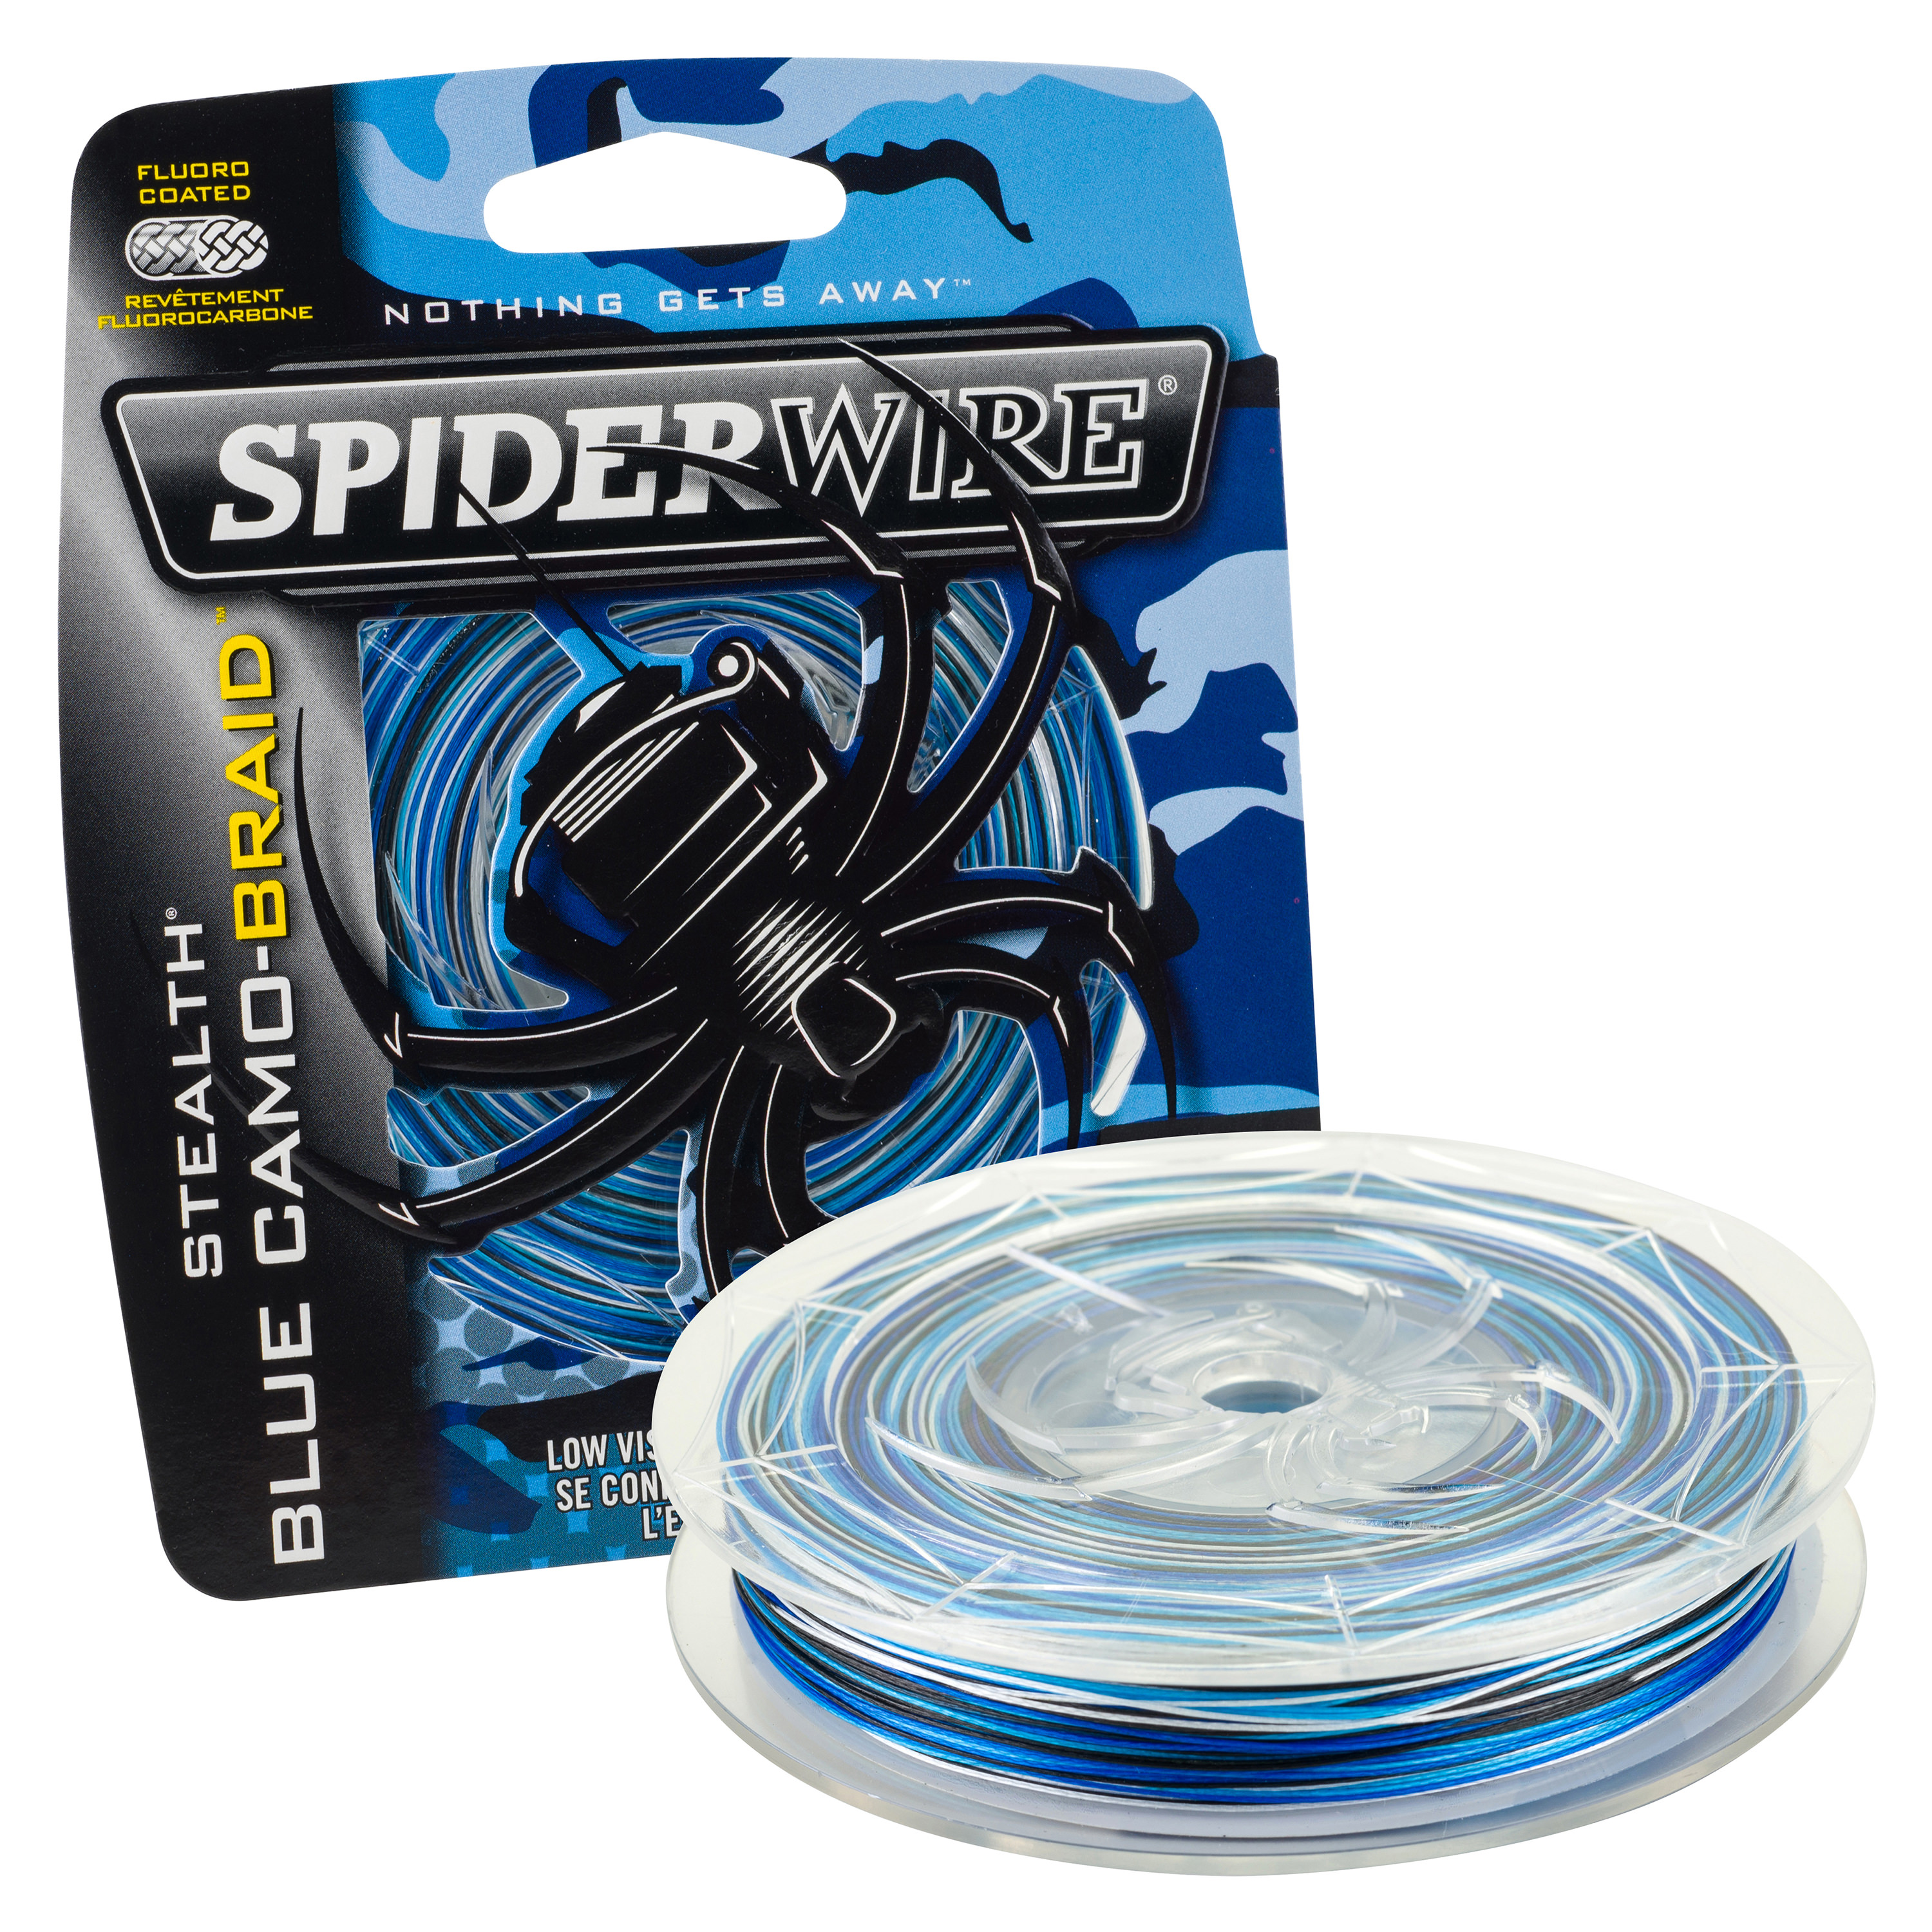 https://op1.0ps.us/original/opplanet-spiderwire-scs100bc-200-stealth-camoblue-100lb-200yd-1374149